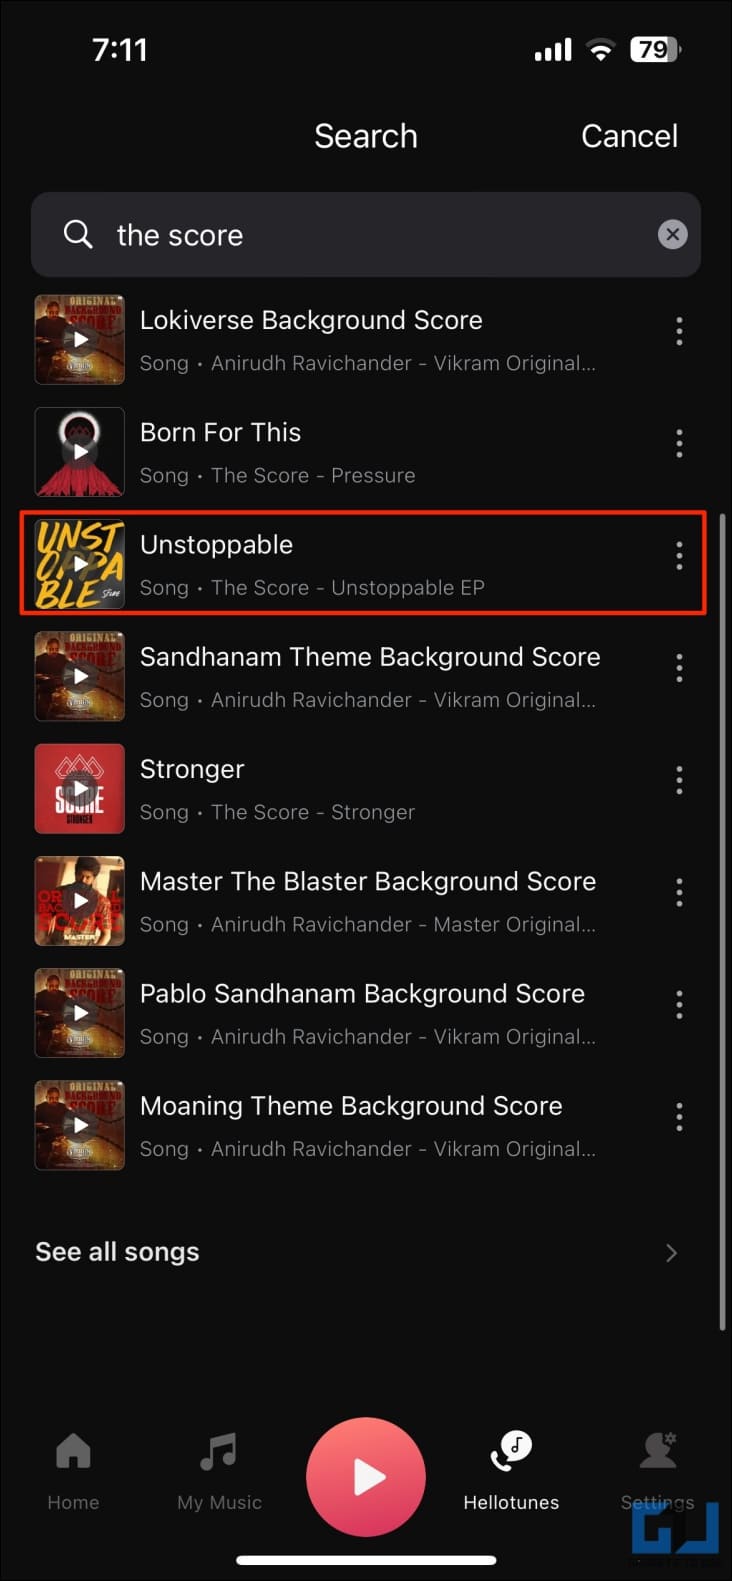 Search and select the song